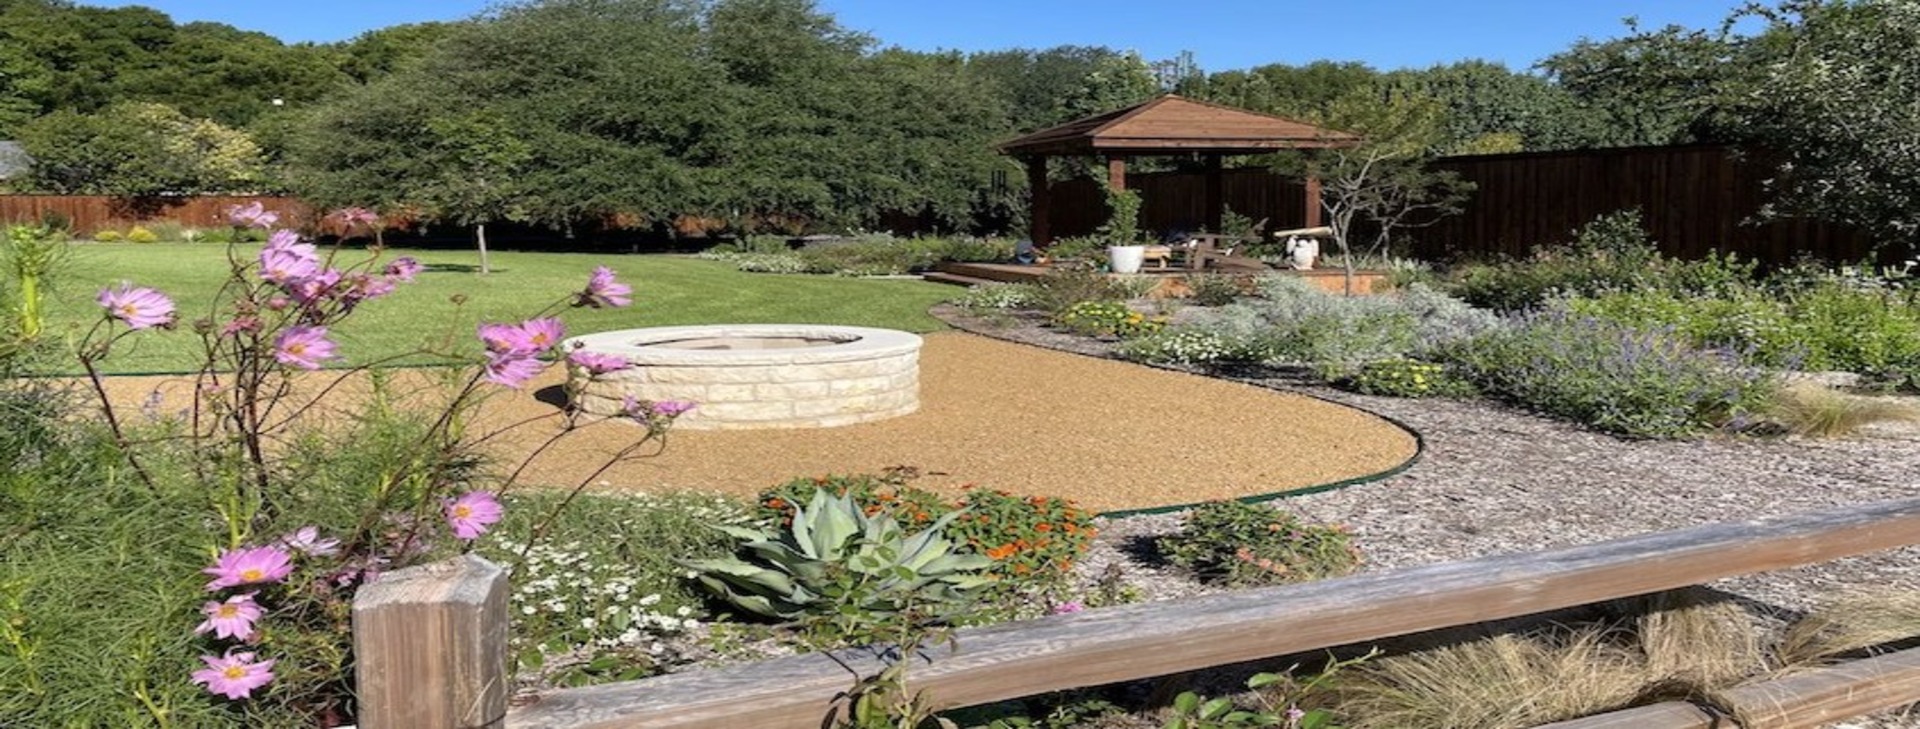 xeriscaping with native plants and fire pit